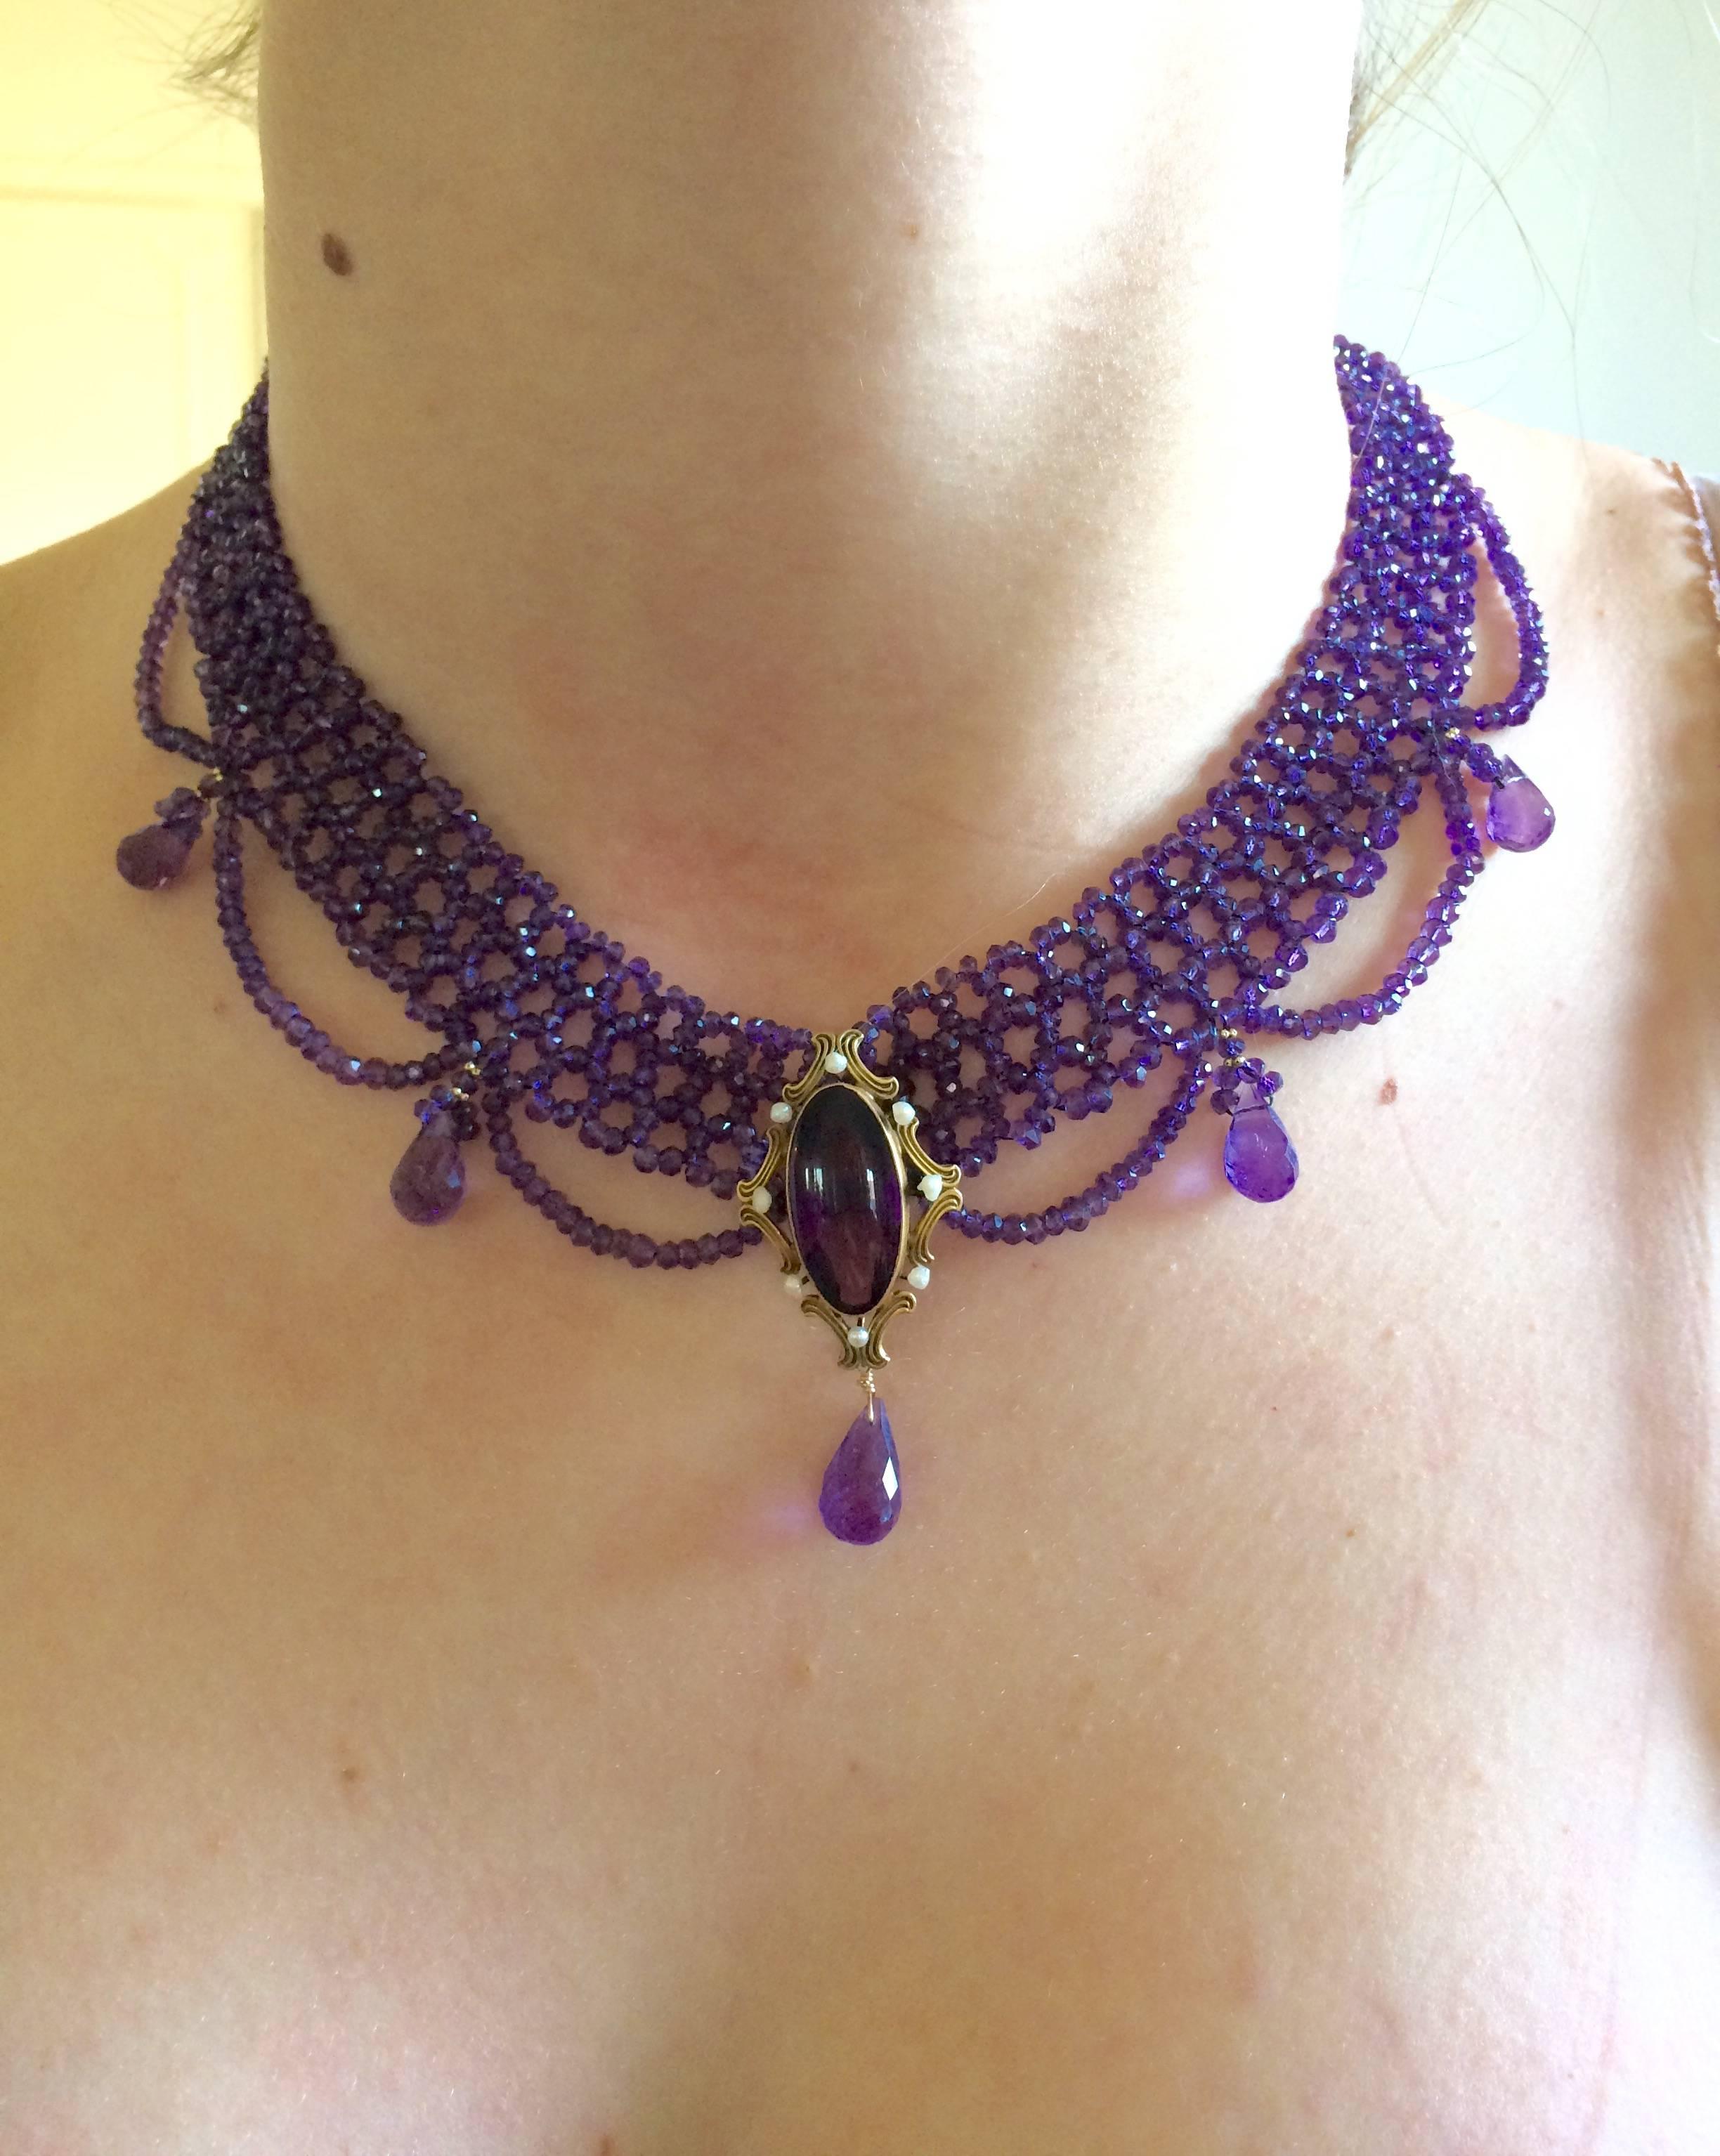 This lush and vivid necklace is meticulously woven into a tight and tapered band. The taper allows the necklace to curve around the neckline for a contoured fit. 

Faceted Amethyst beads are highlighted with tiny 14 K gold beads that dance around